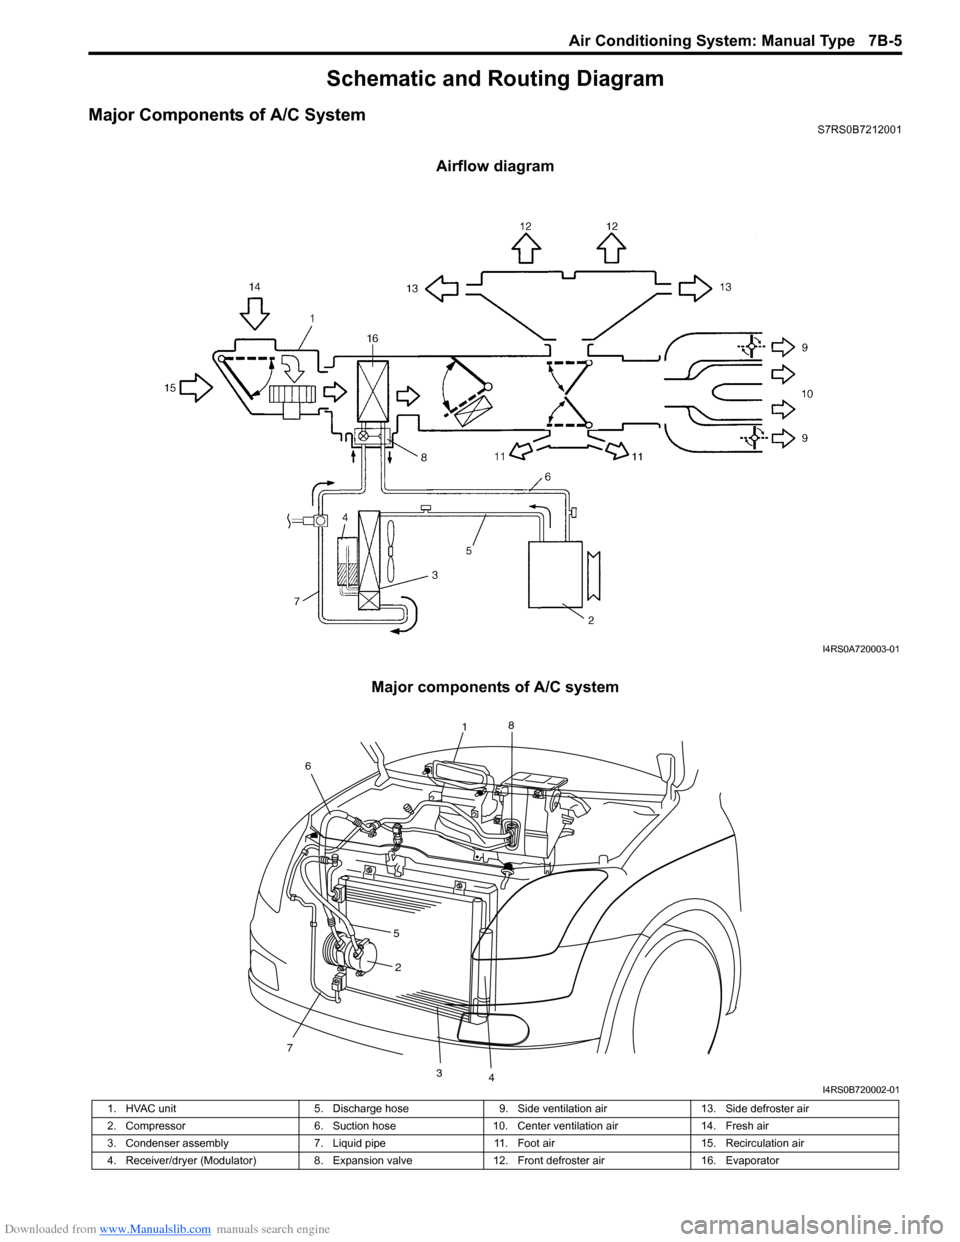 SUZUKI SWIFT 2007 2.G Service Workshop Manual Downloaded from www.Manualslib.com manuals search engine Air Conditioning System: Manual Type 7B-5
Schematic and Routing Diagram
Major Components of A/C SystemS7RS0B7212001
Airflow diagram
Major compo